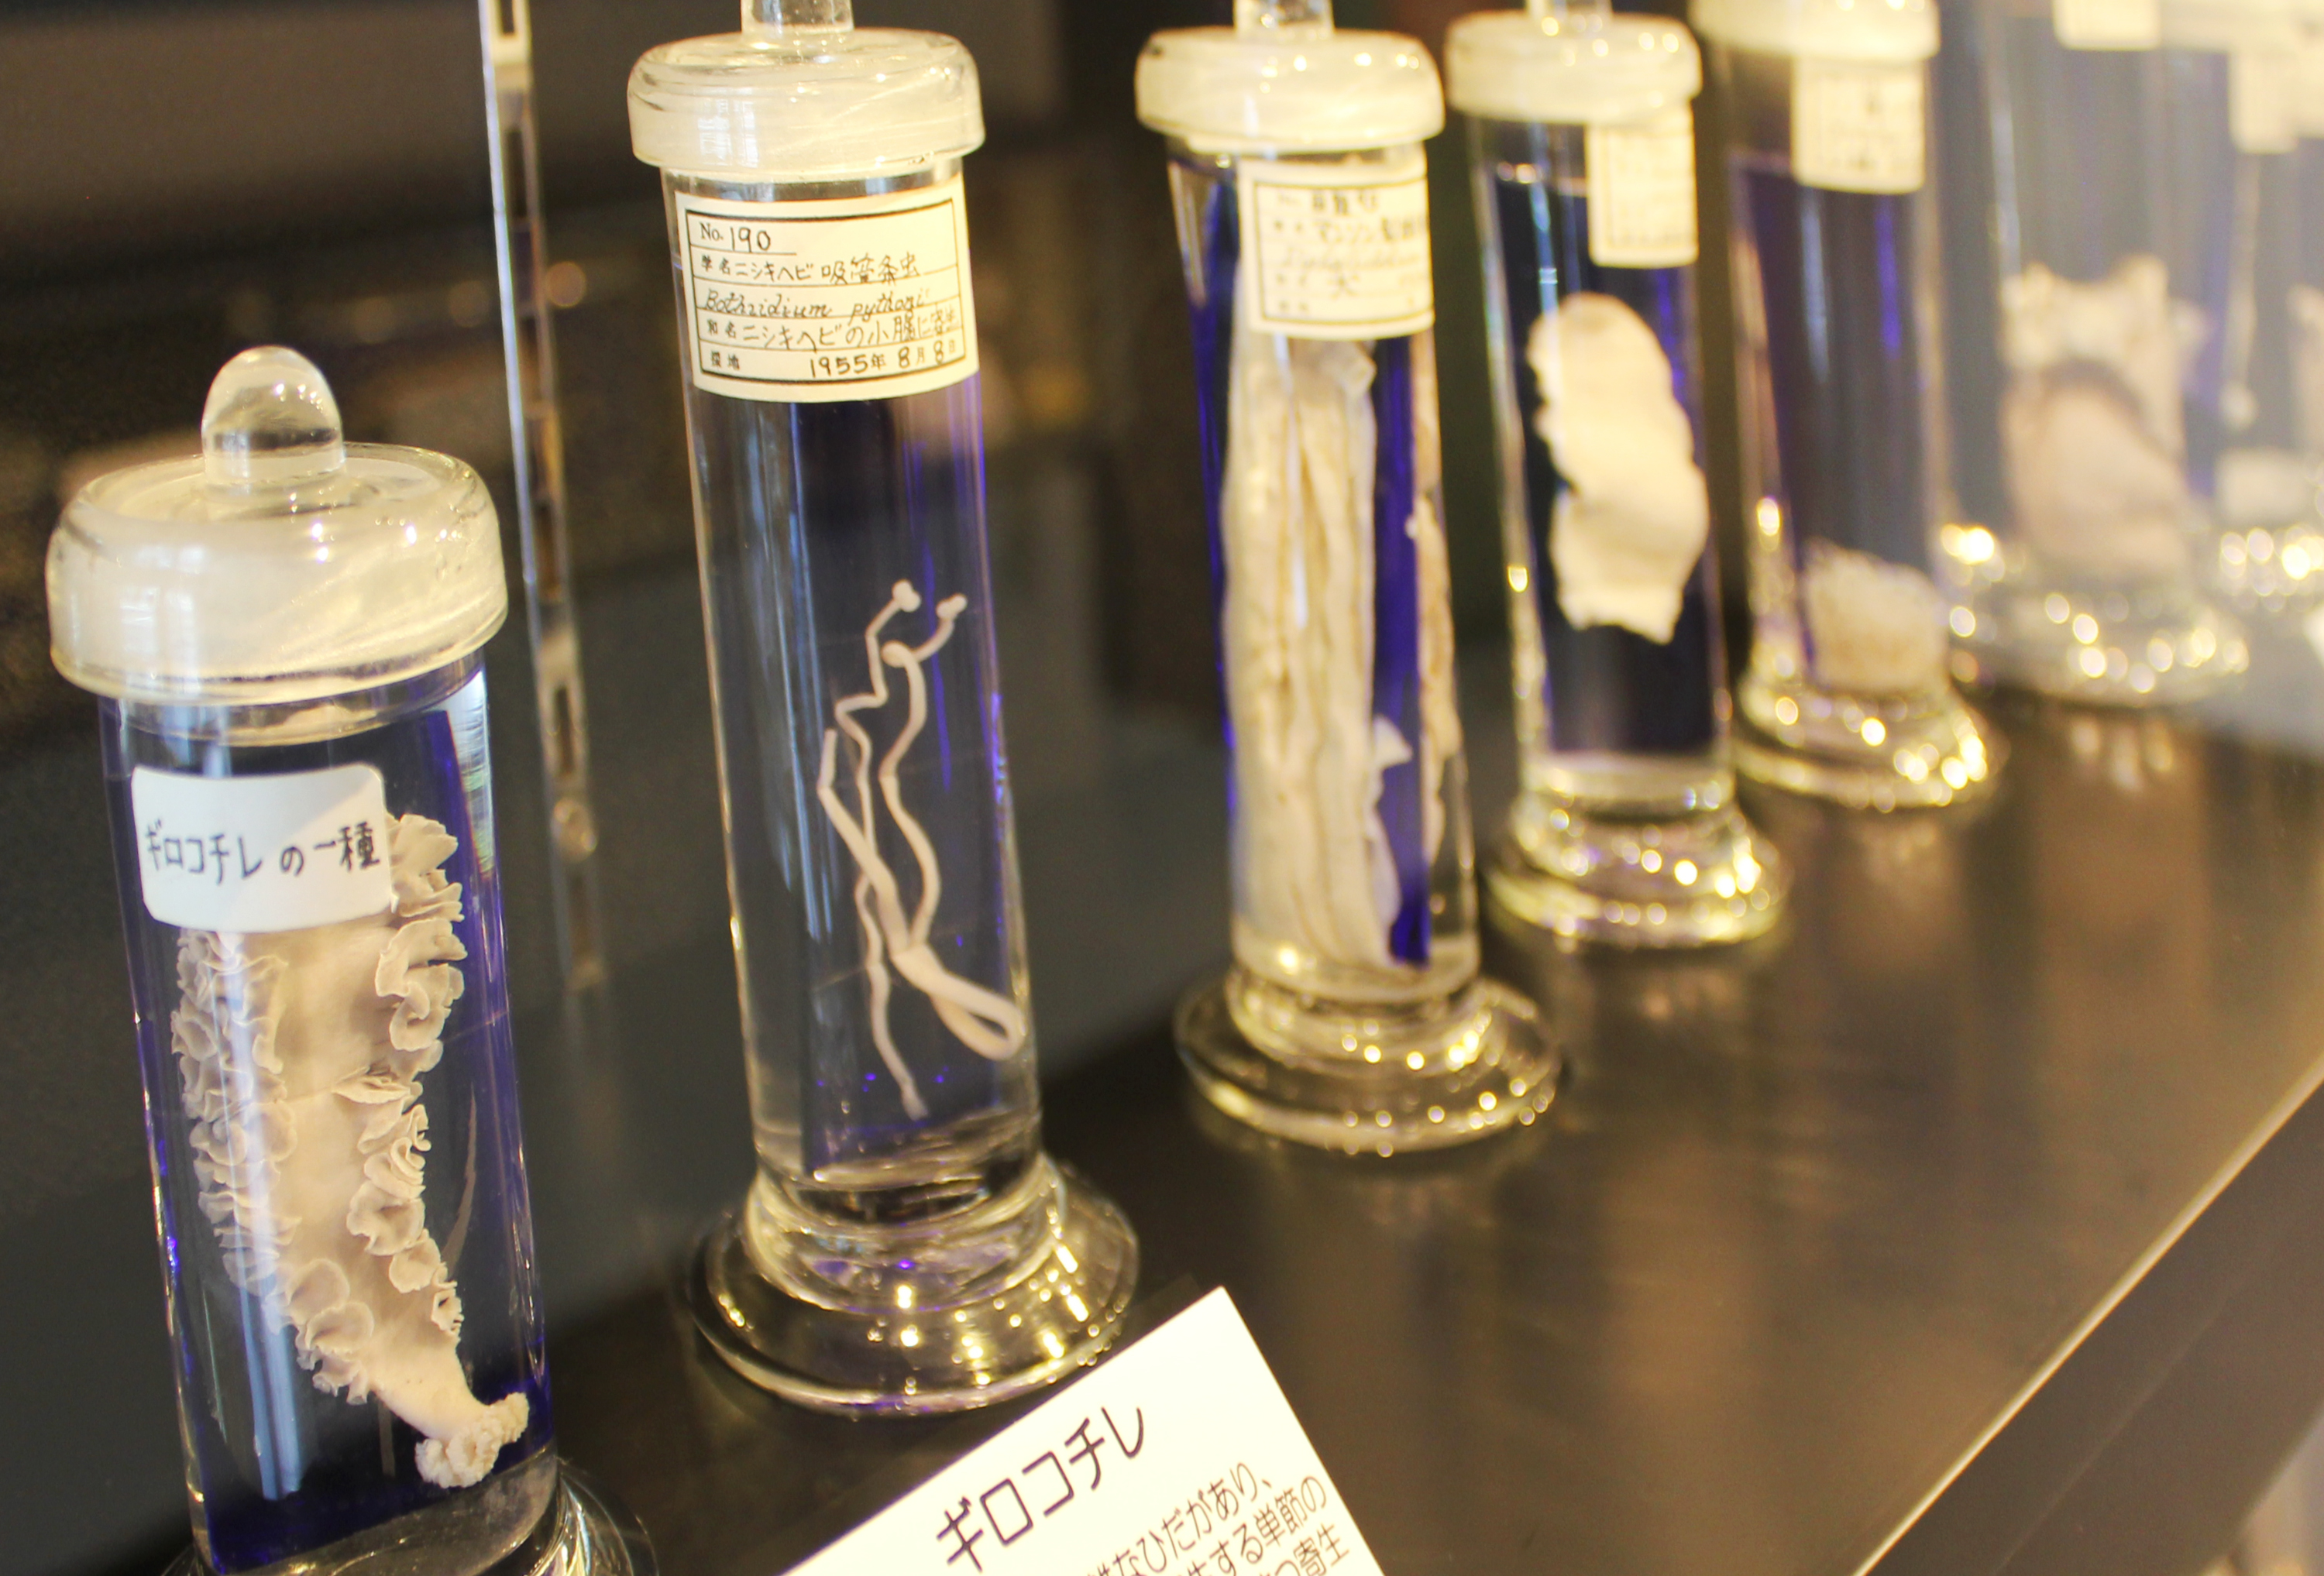 Meguro Parasitological Museum - Unusual and quirky things to do in Tokyo